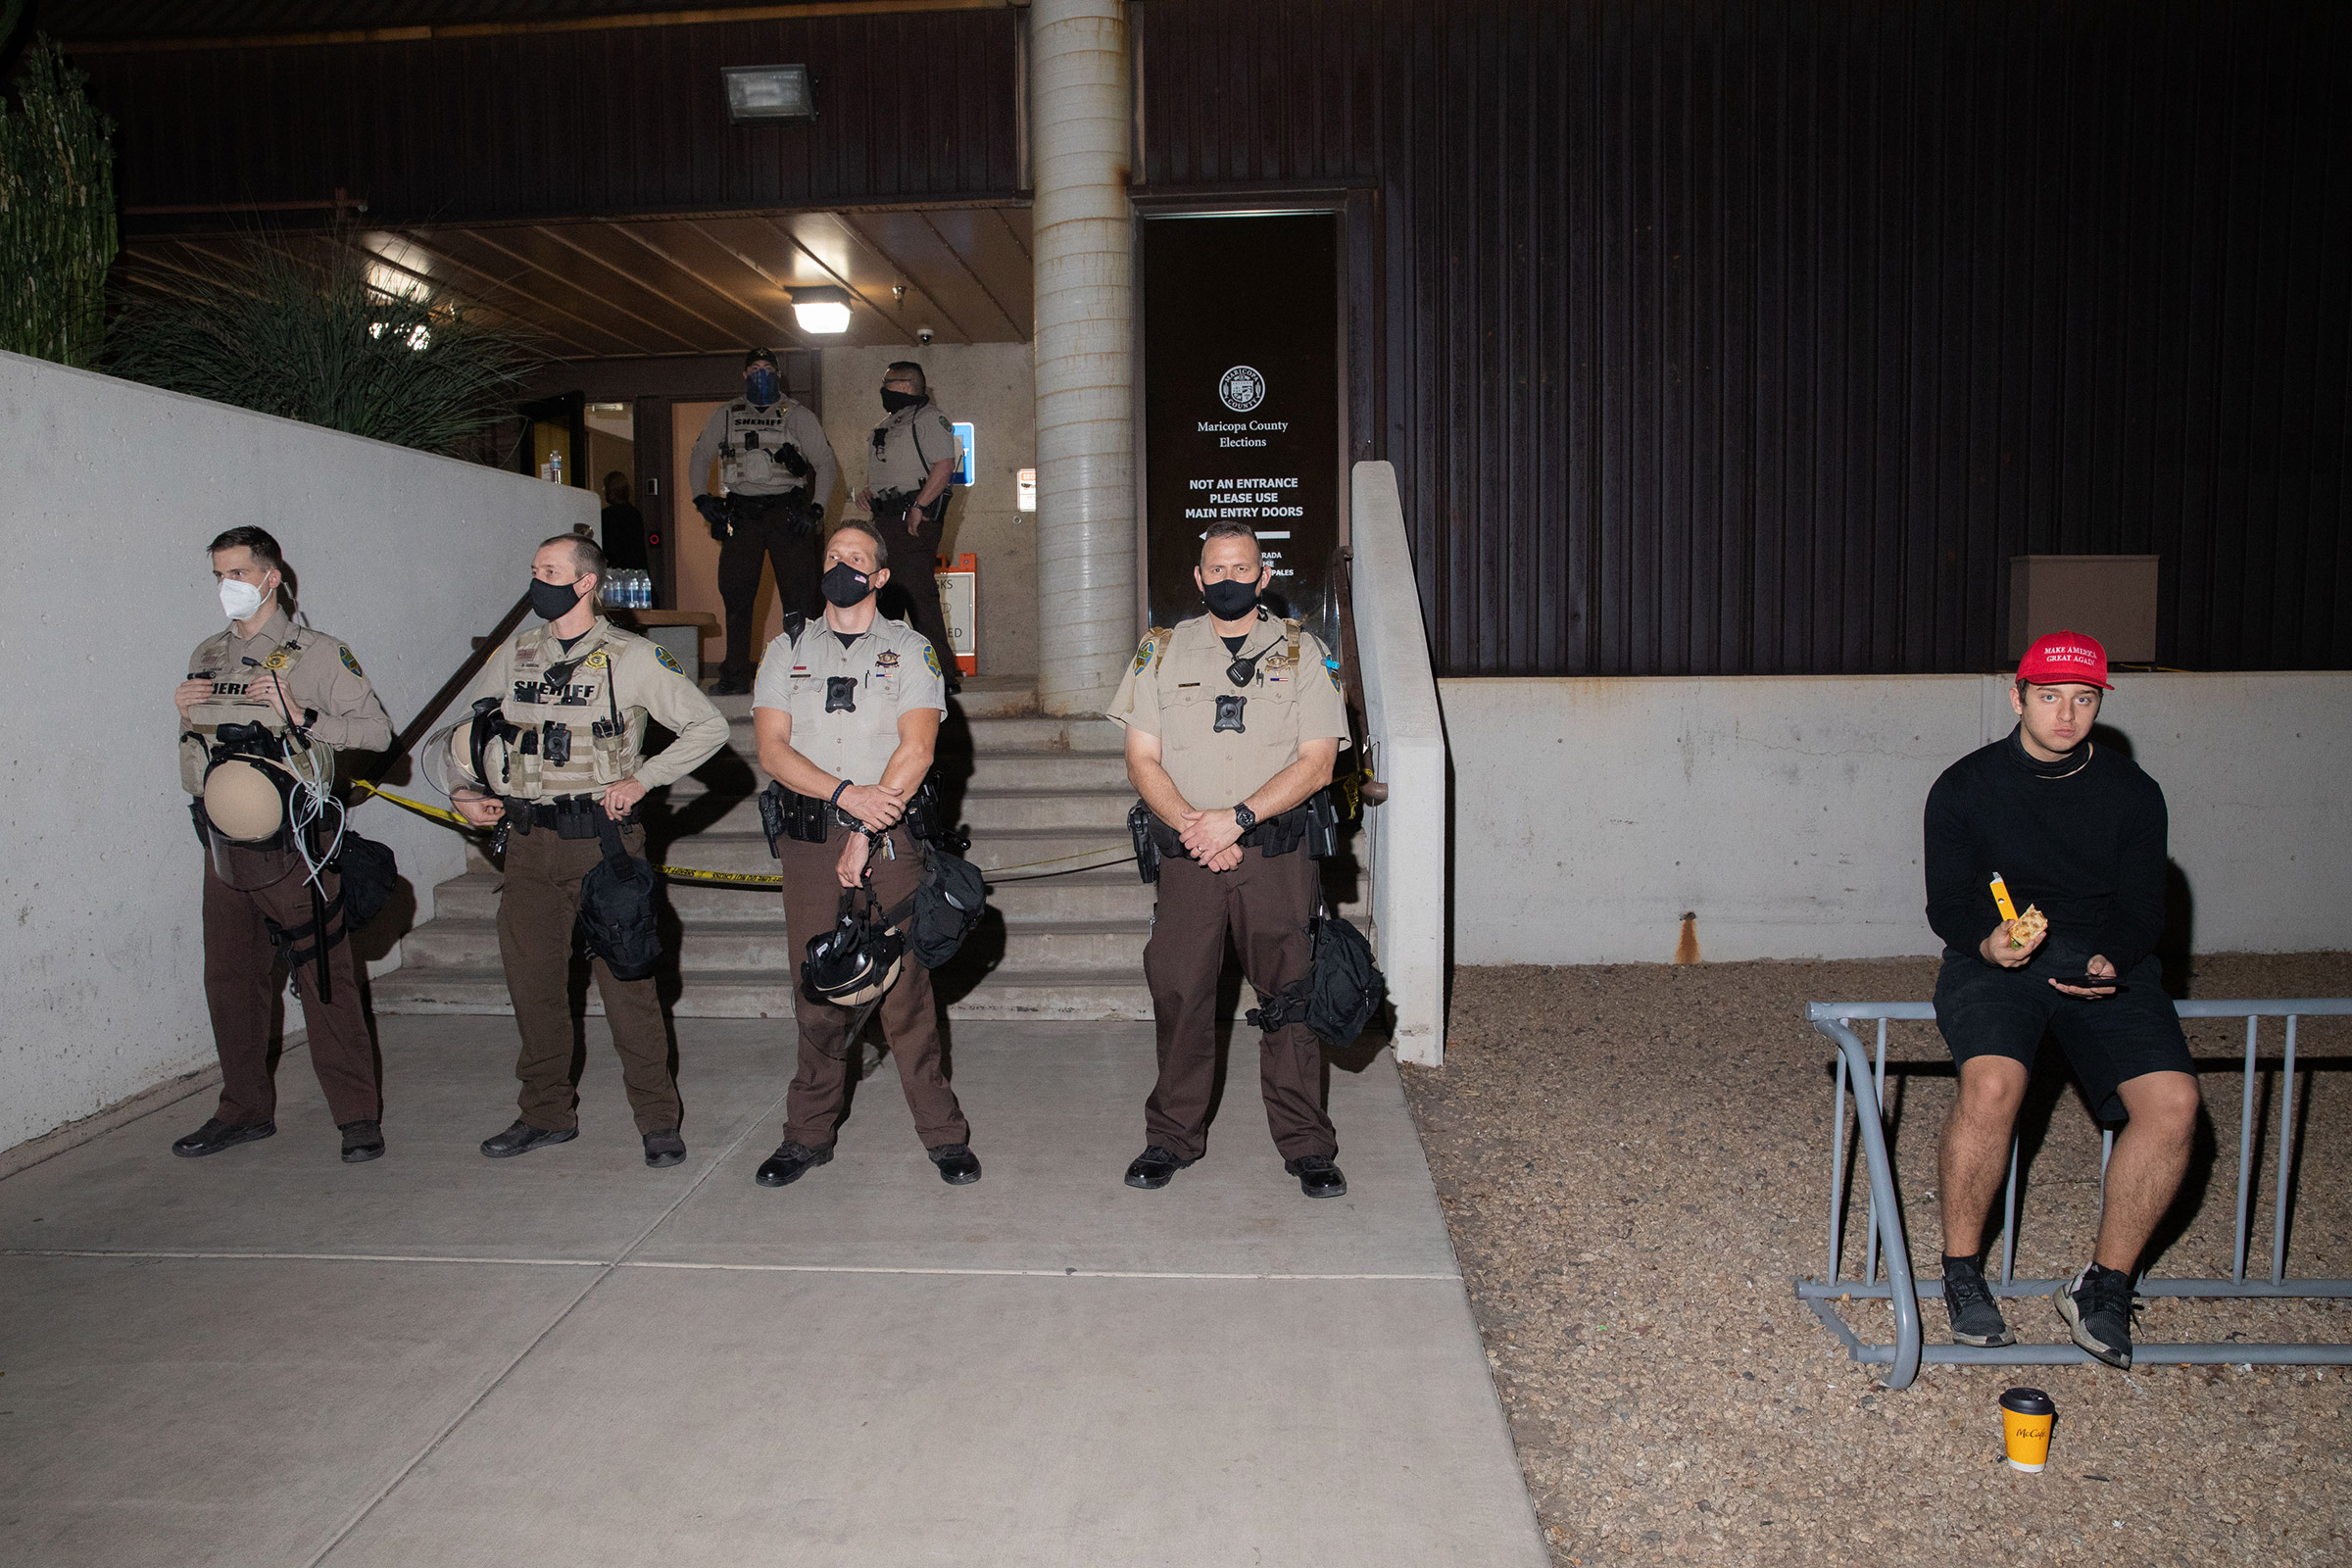 Law enforcement guard the Maricopa County Elections office in Phoenix, Ariz., on Nov. 4 (Sinna Nasseri for TIME)